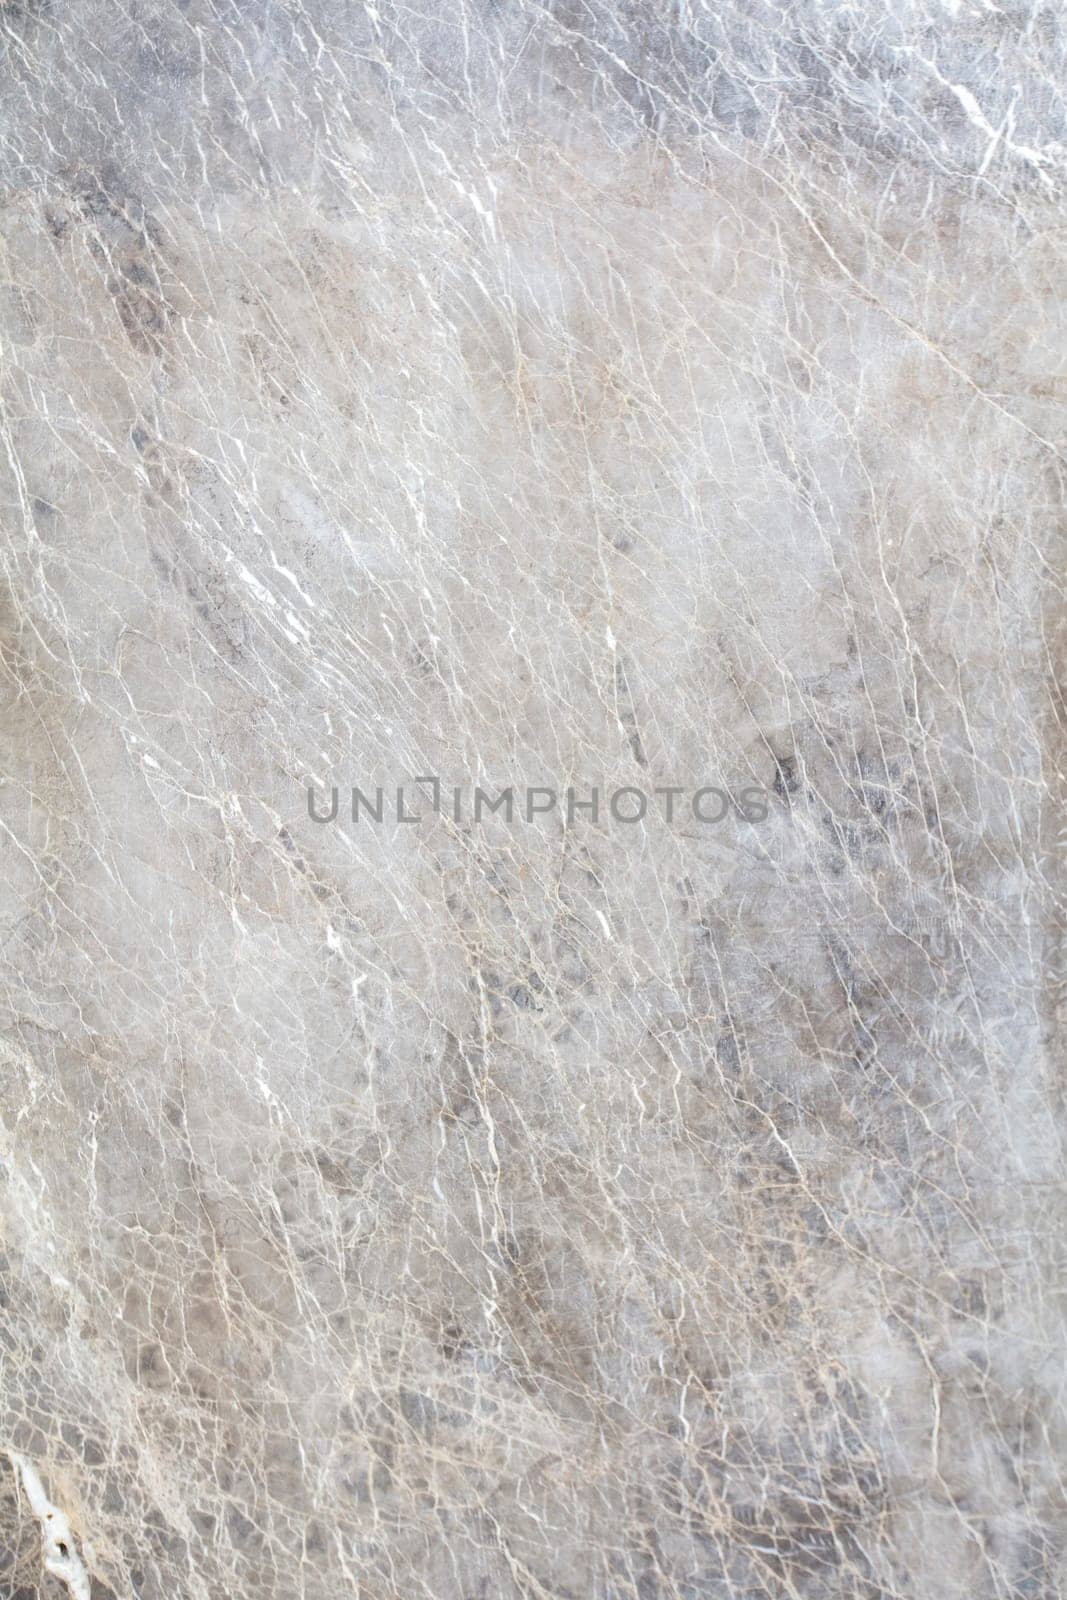 Marble Texture. High quality photo